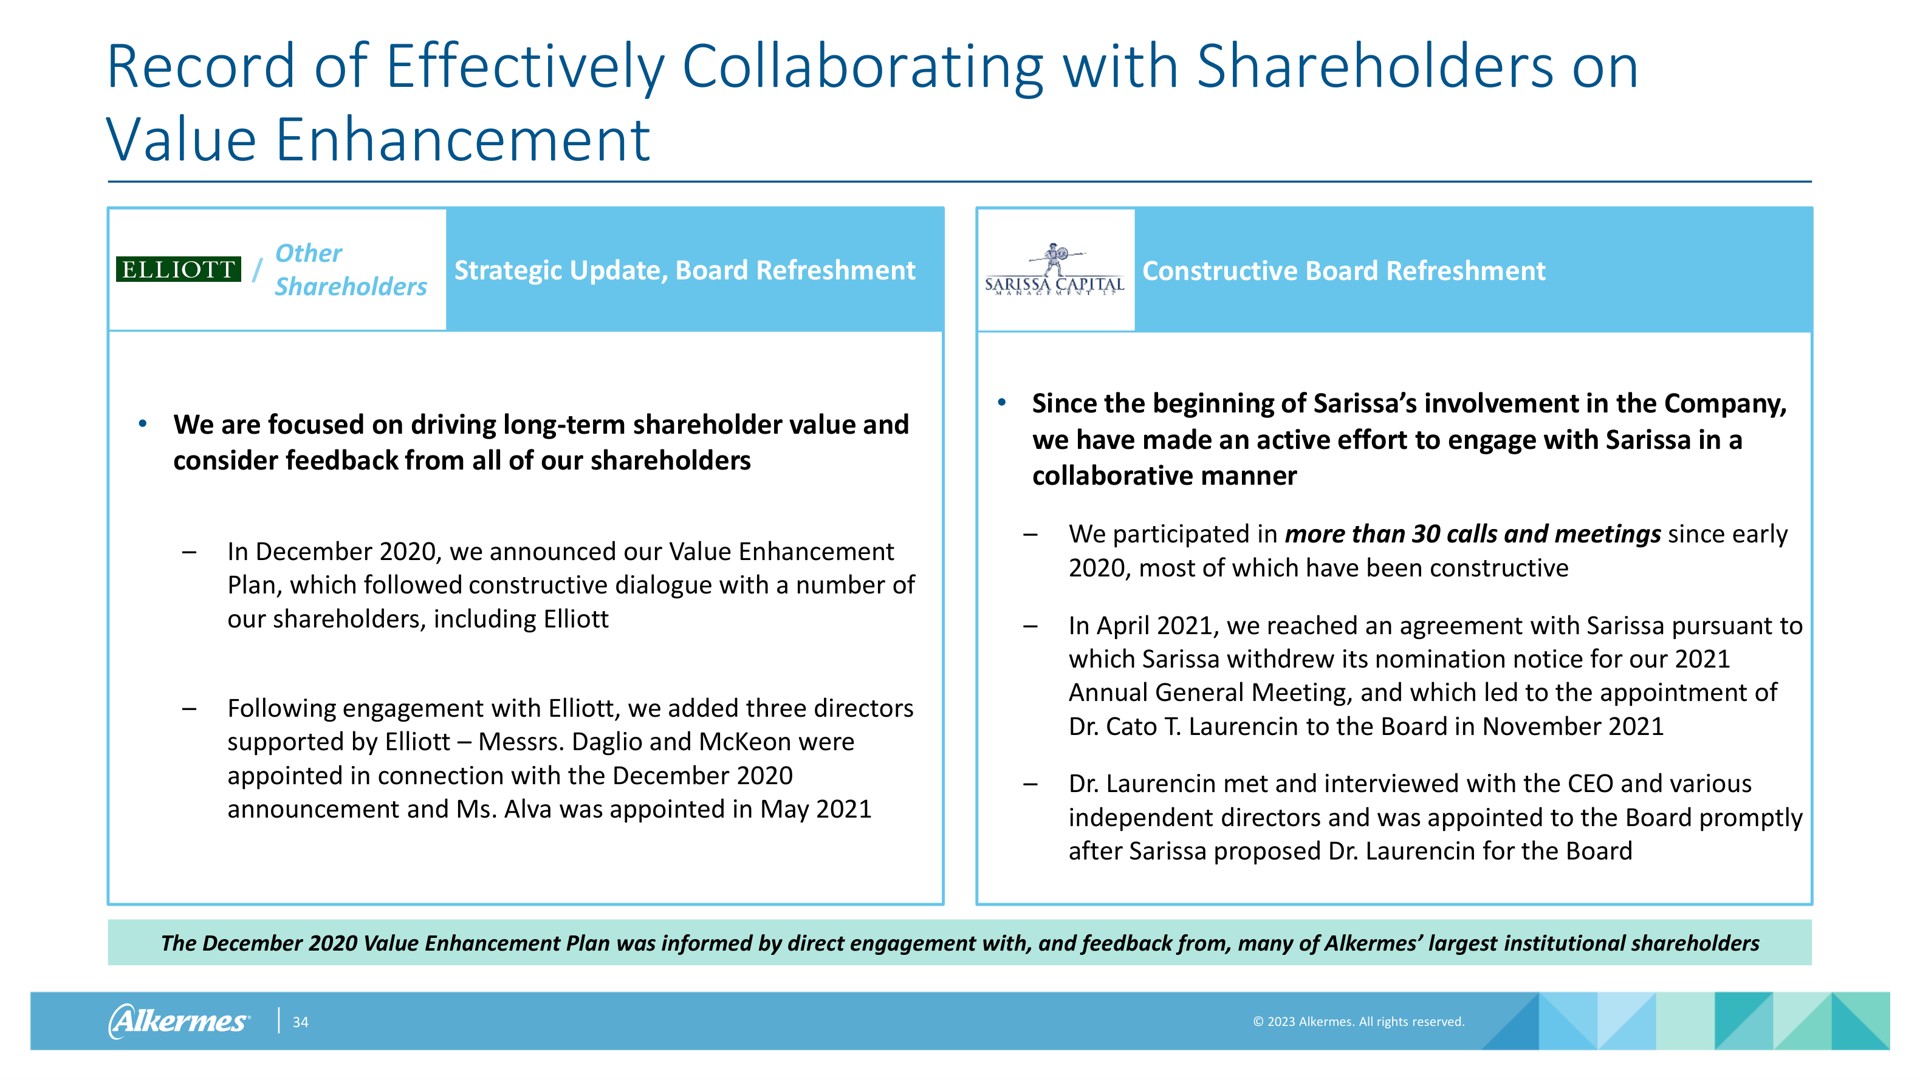 record of effectively collaborating with shareholders on value enhancement | Alkermes